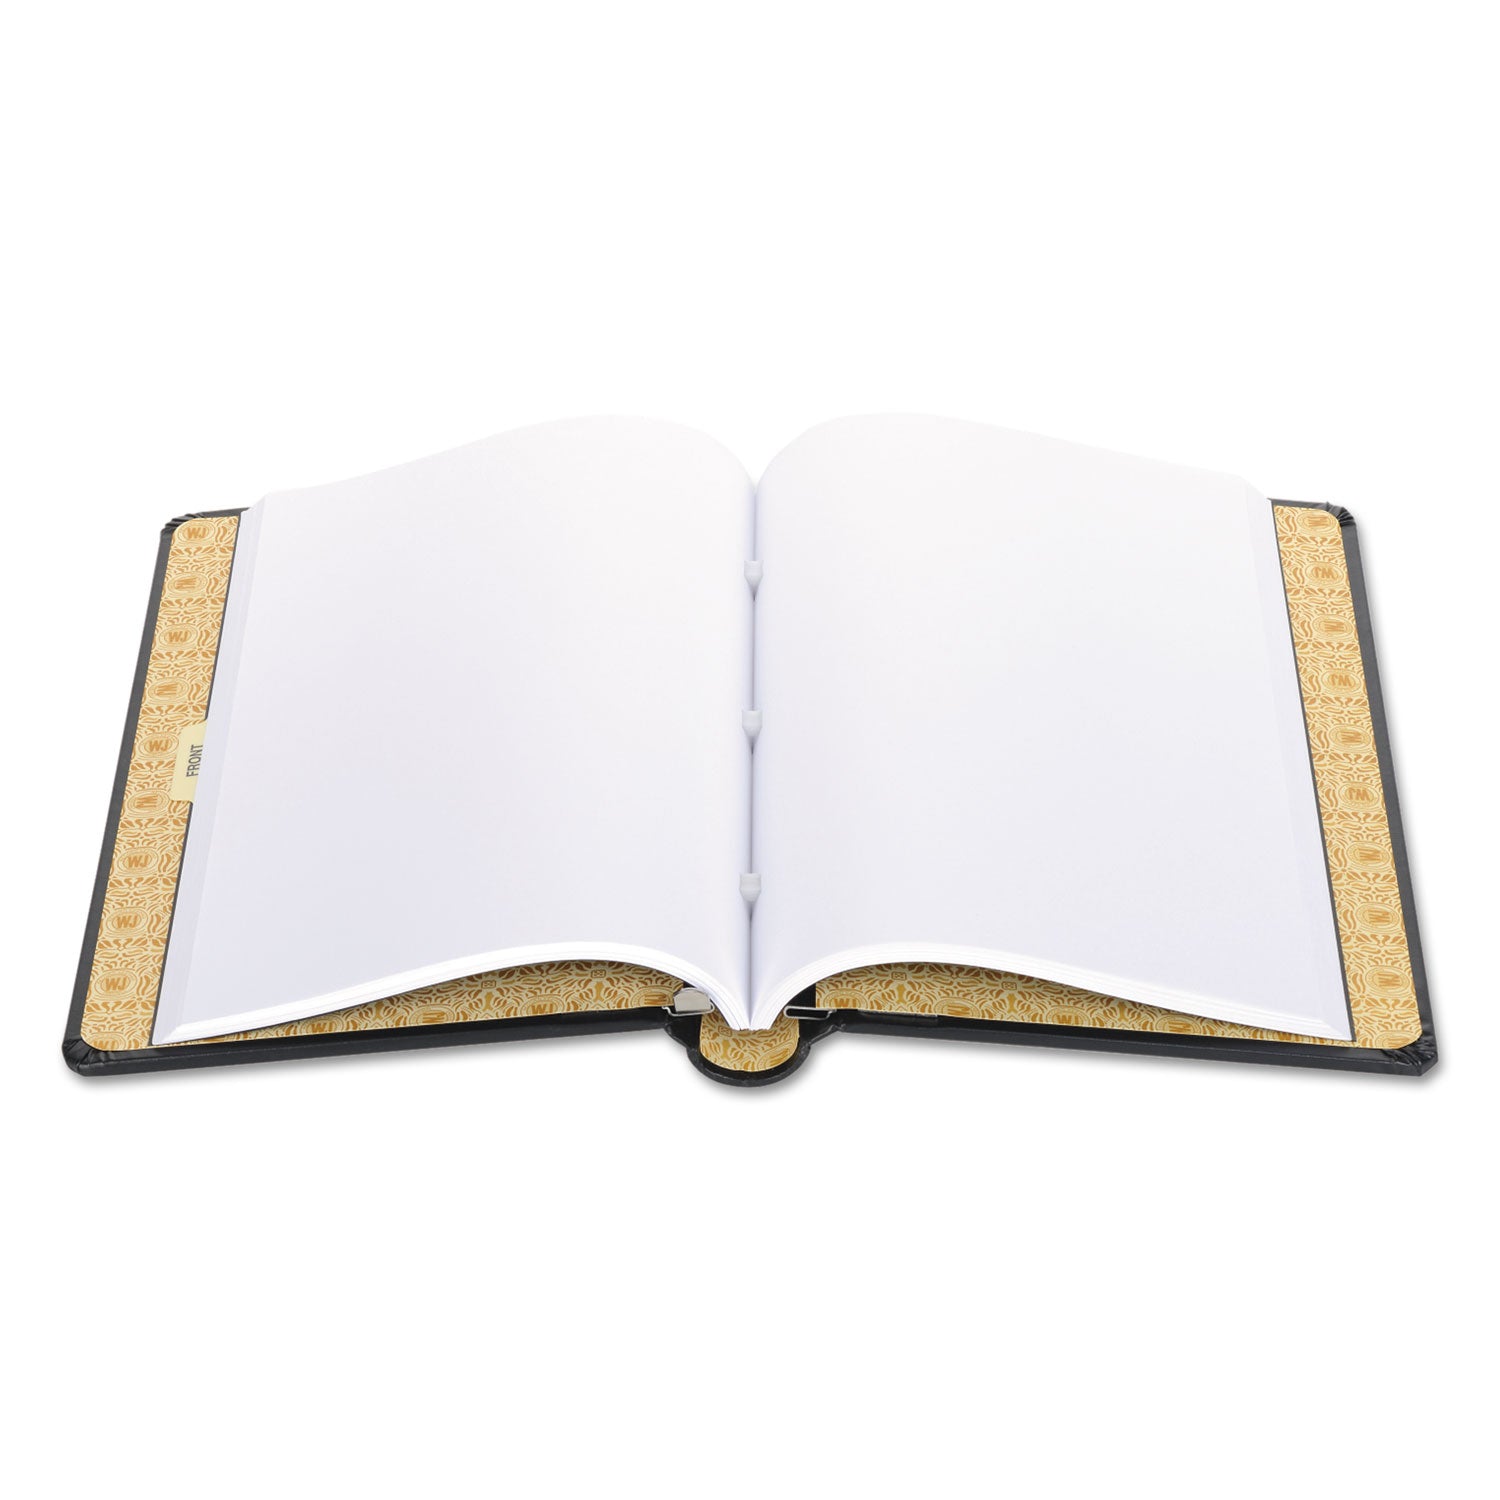 Looseleaf Corporation Minute Book, 1-Subject, Unruled, Black/Gold Cover, (250) 14 x 8.5 Sheets - 